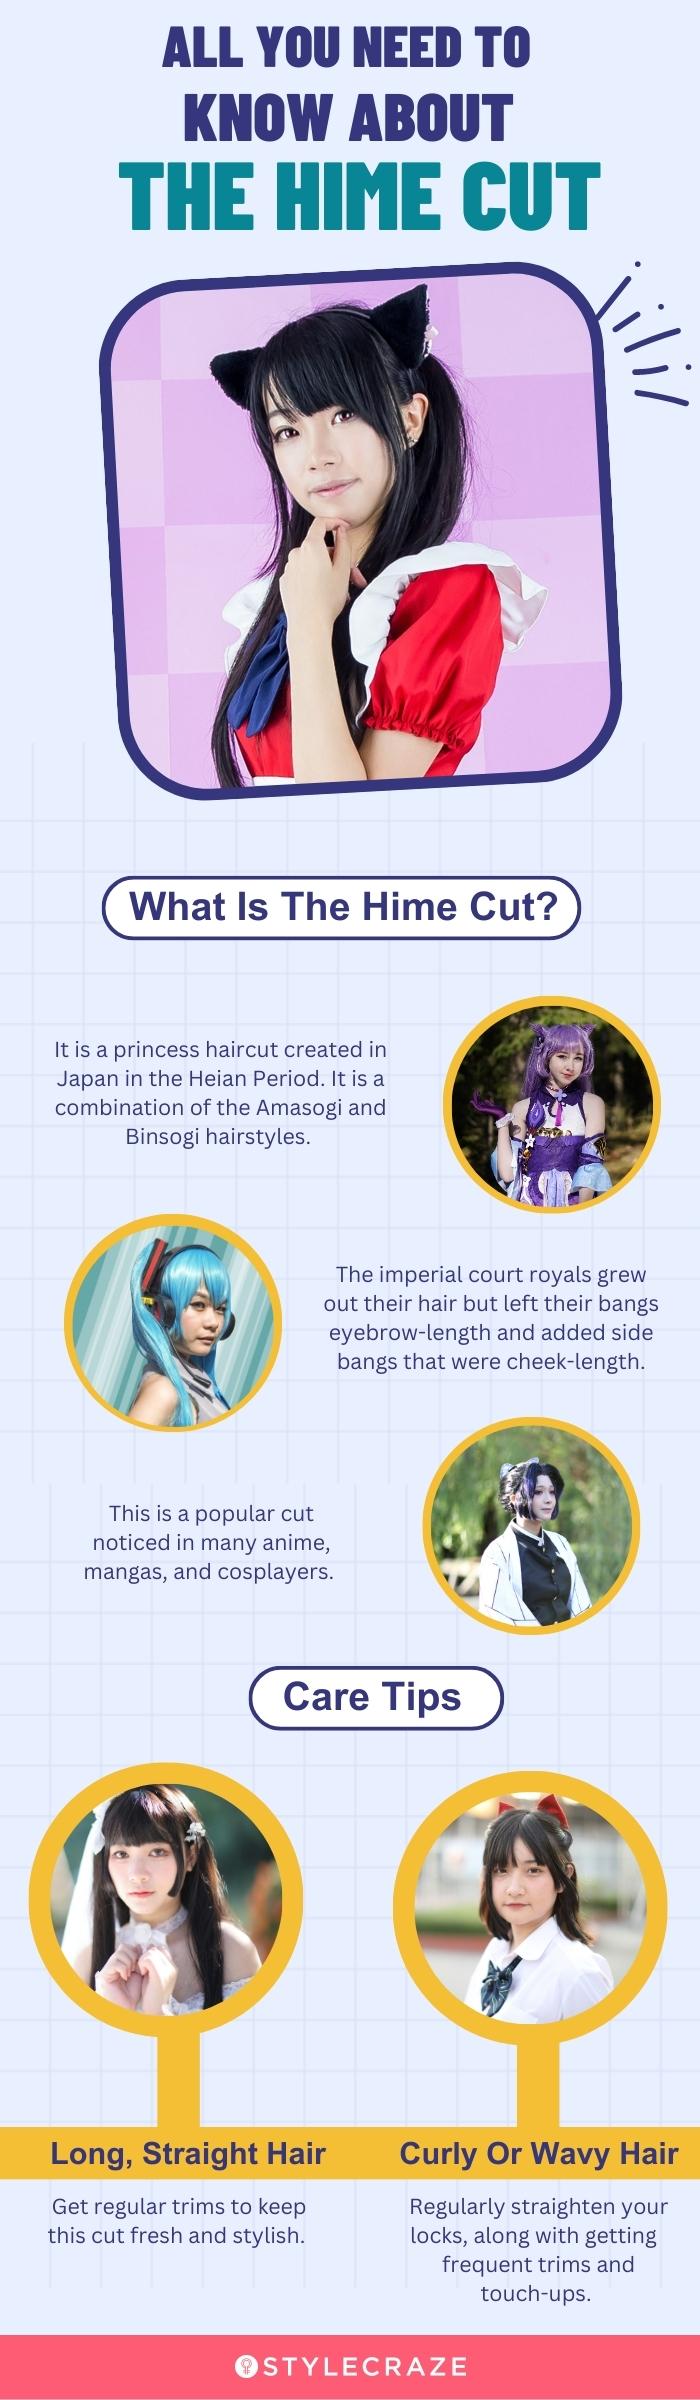 all you need to tát know about the hime cut (infographic)